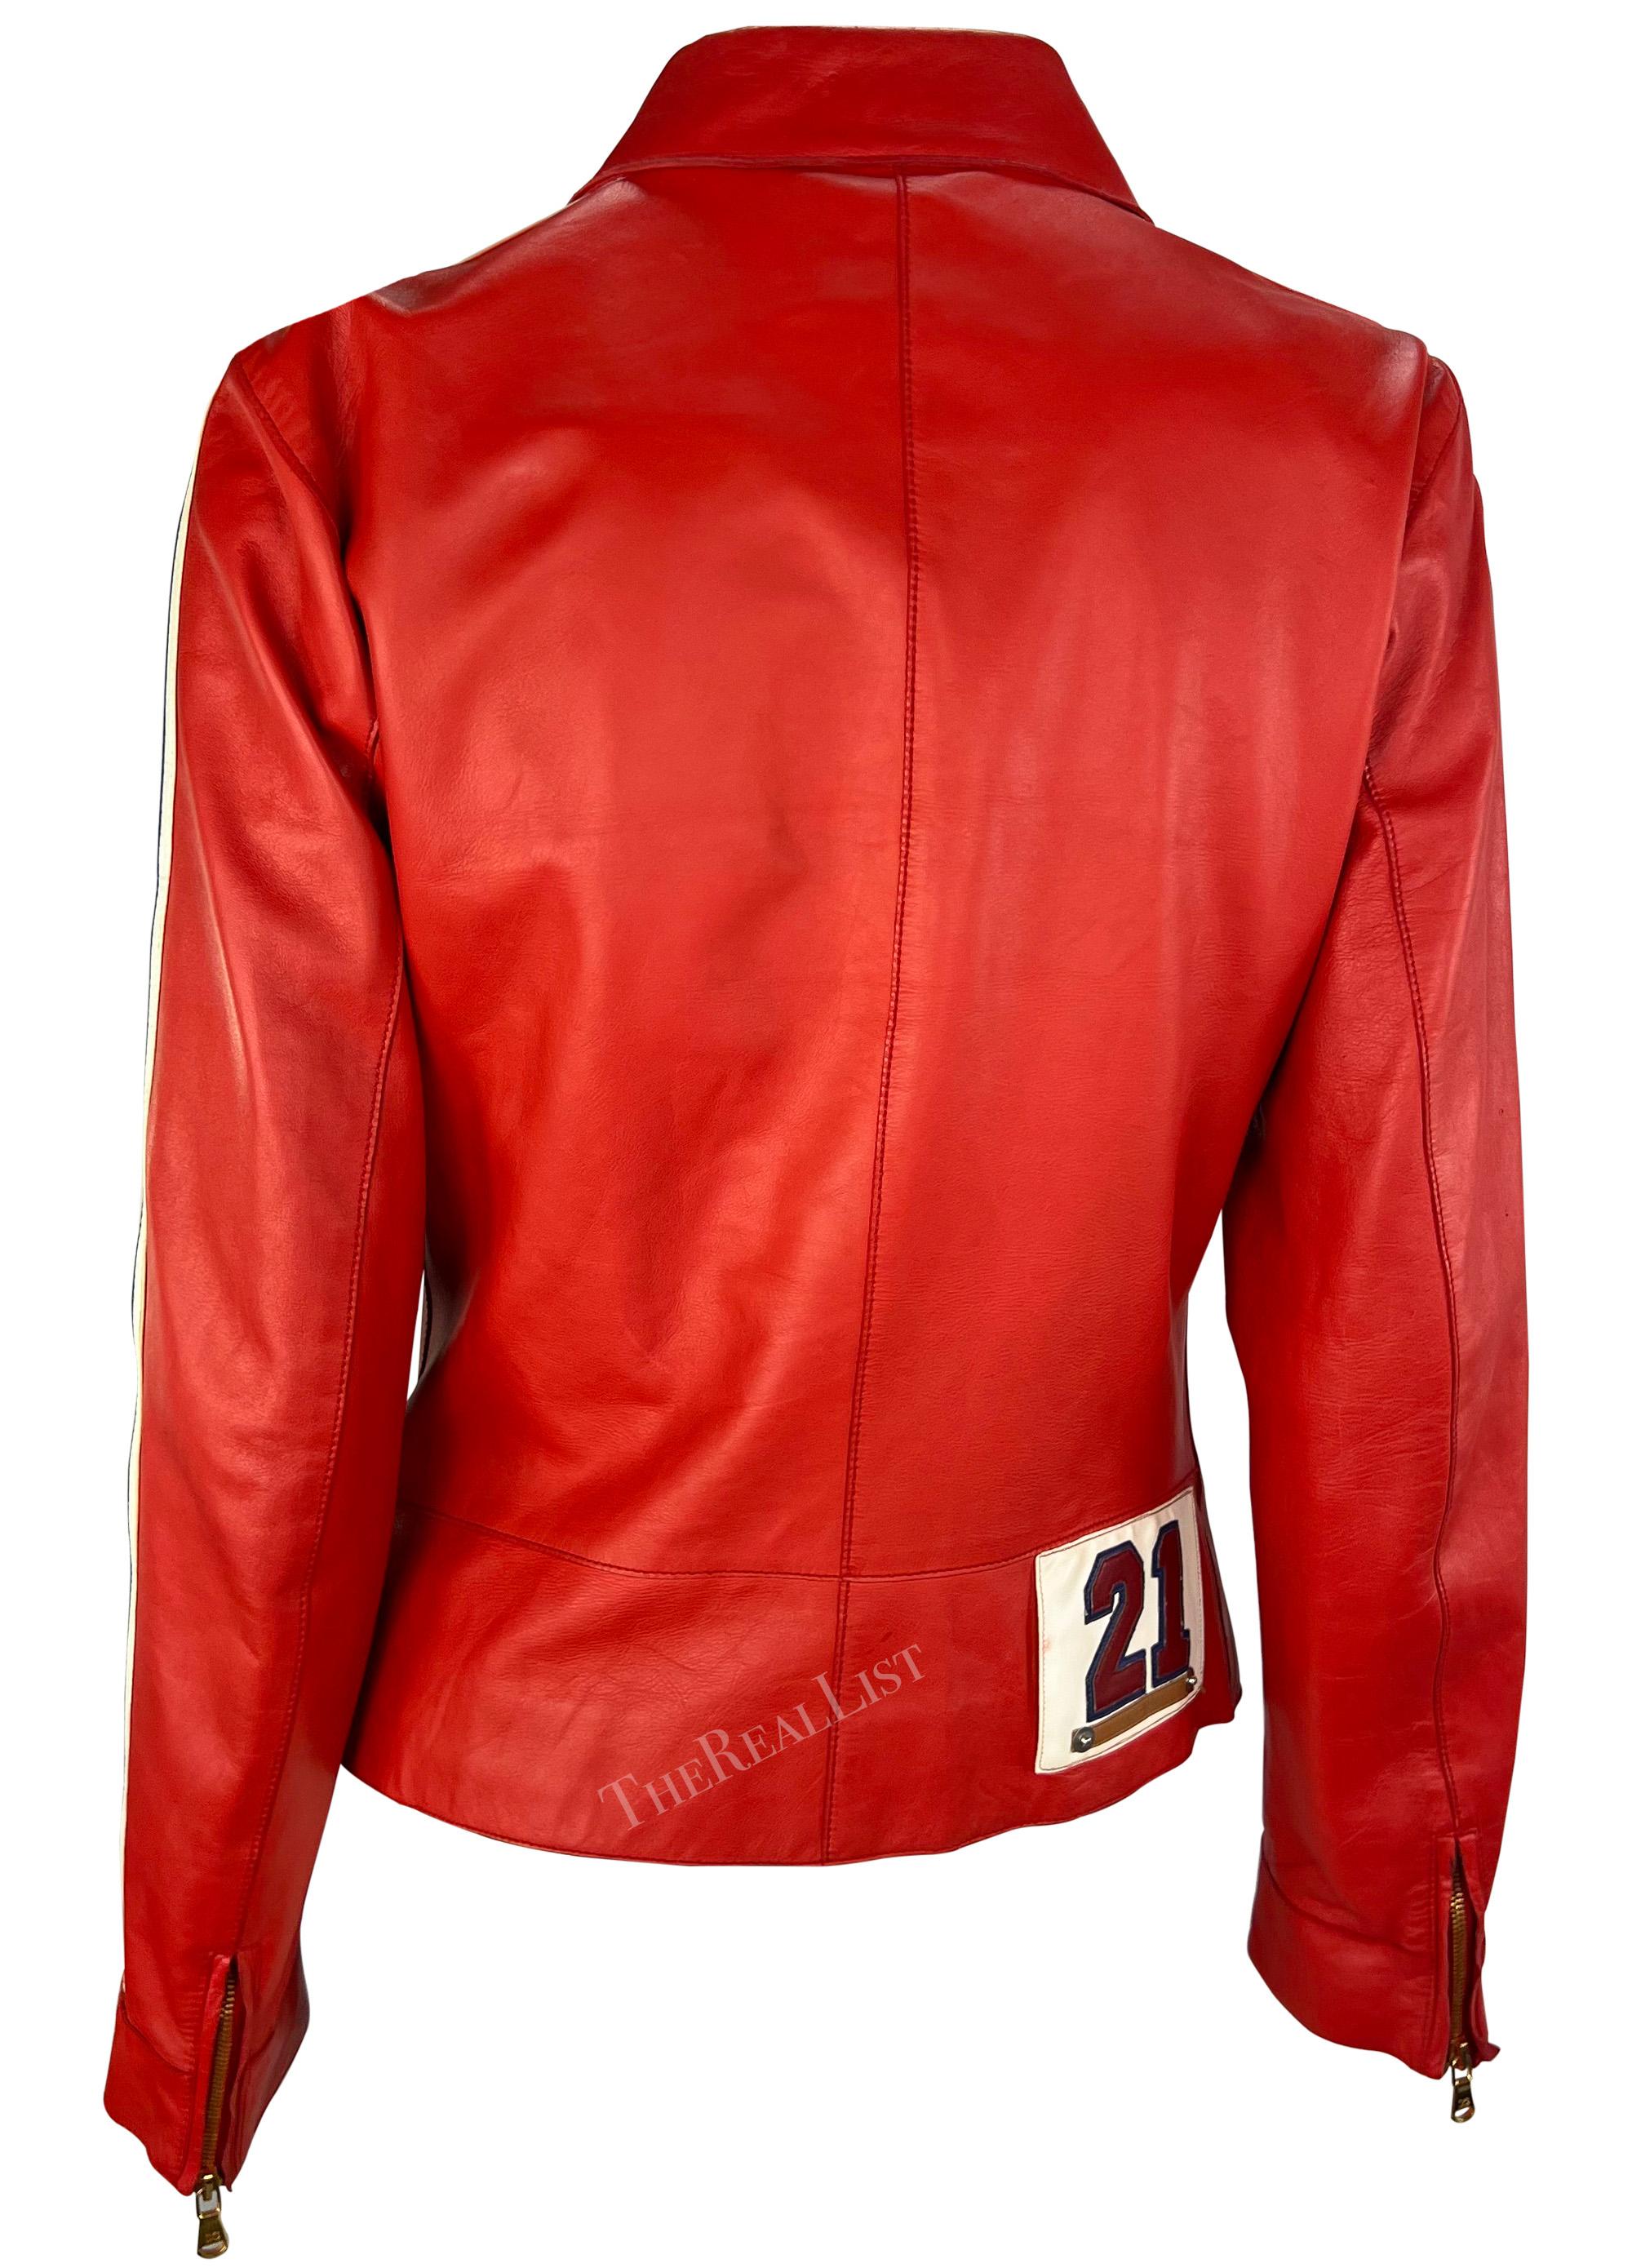 S/S 2001 Dolce & Gabbana Red Moto Style Leather Jacket For Sale 3